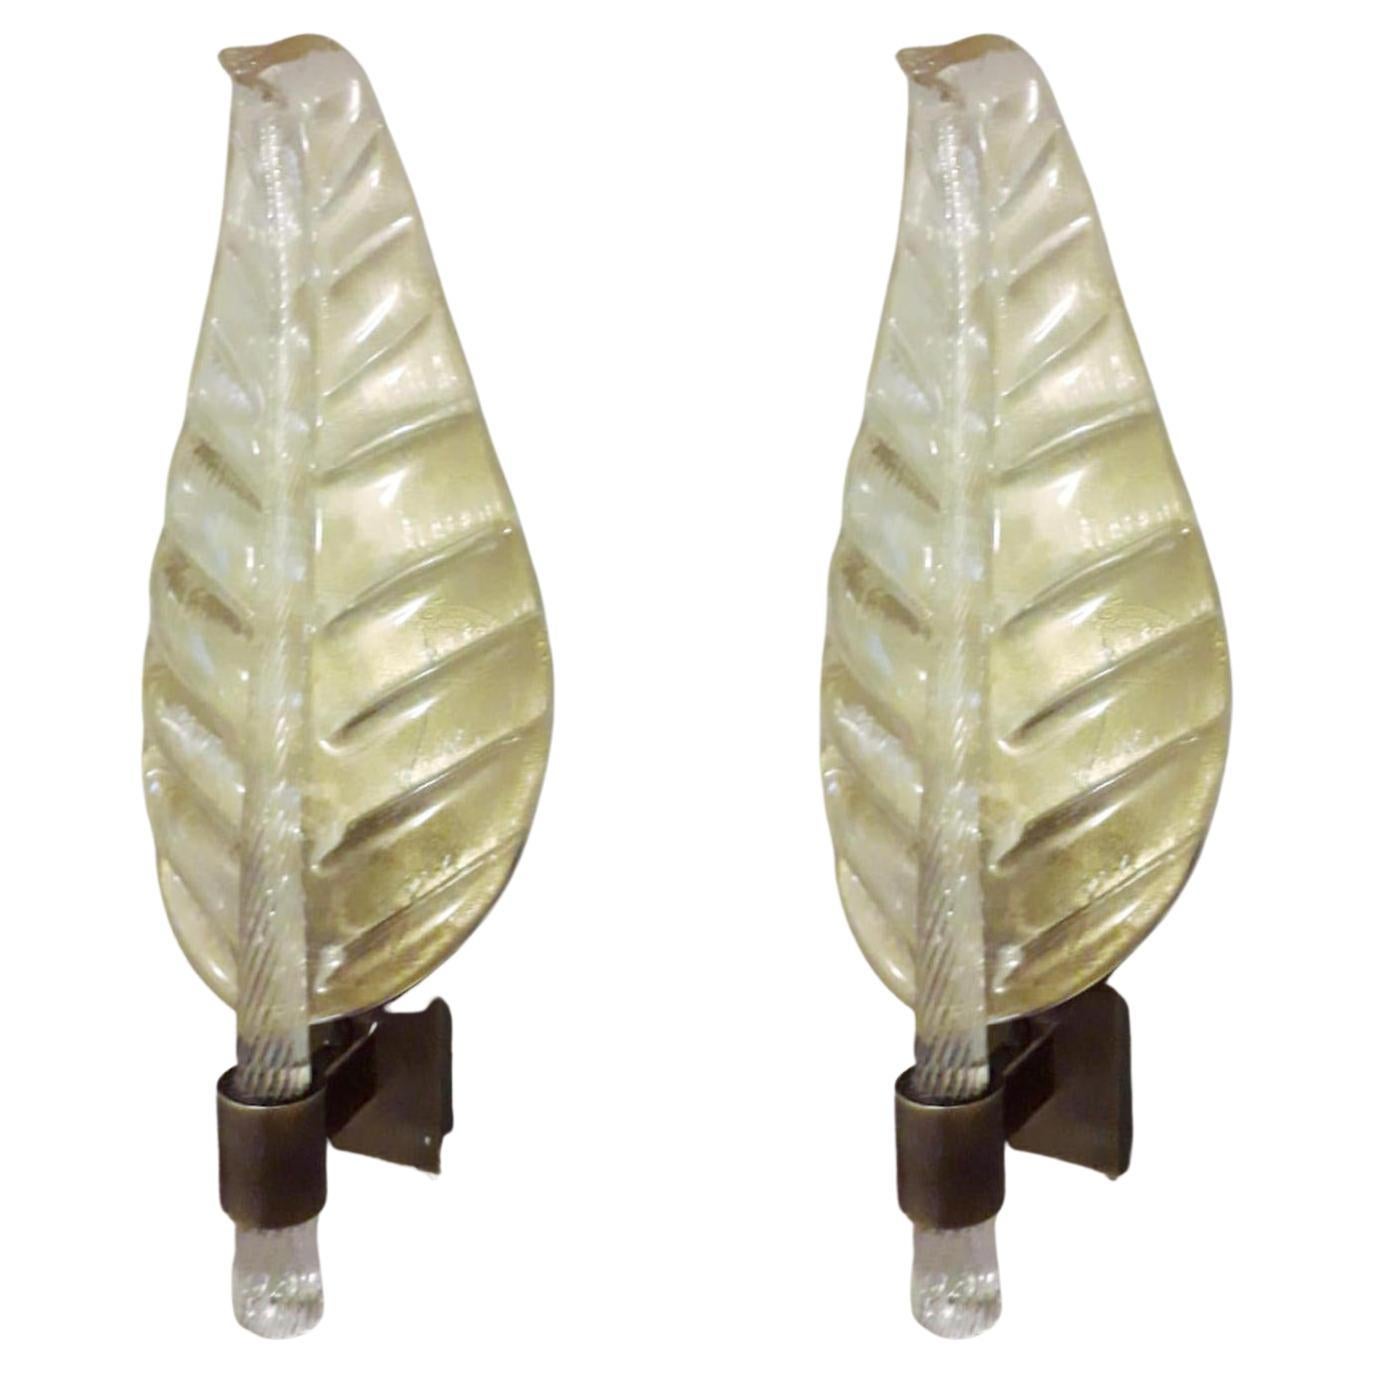 Pair of Large Gold Leaf Sconces by Barovier e Toso